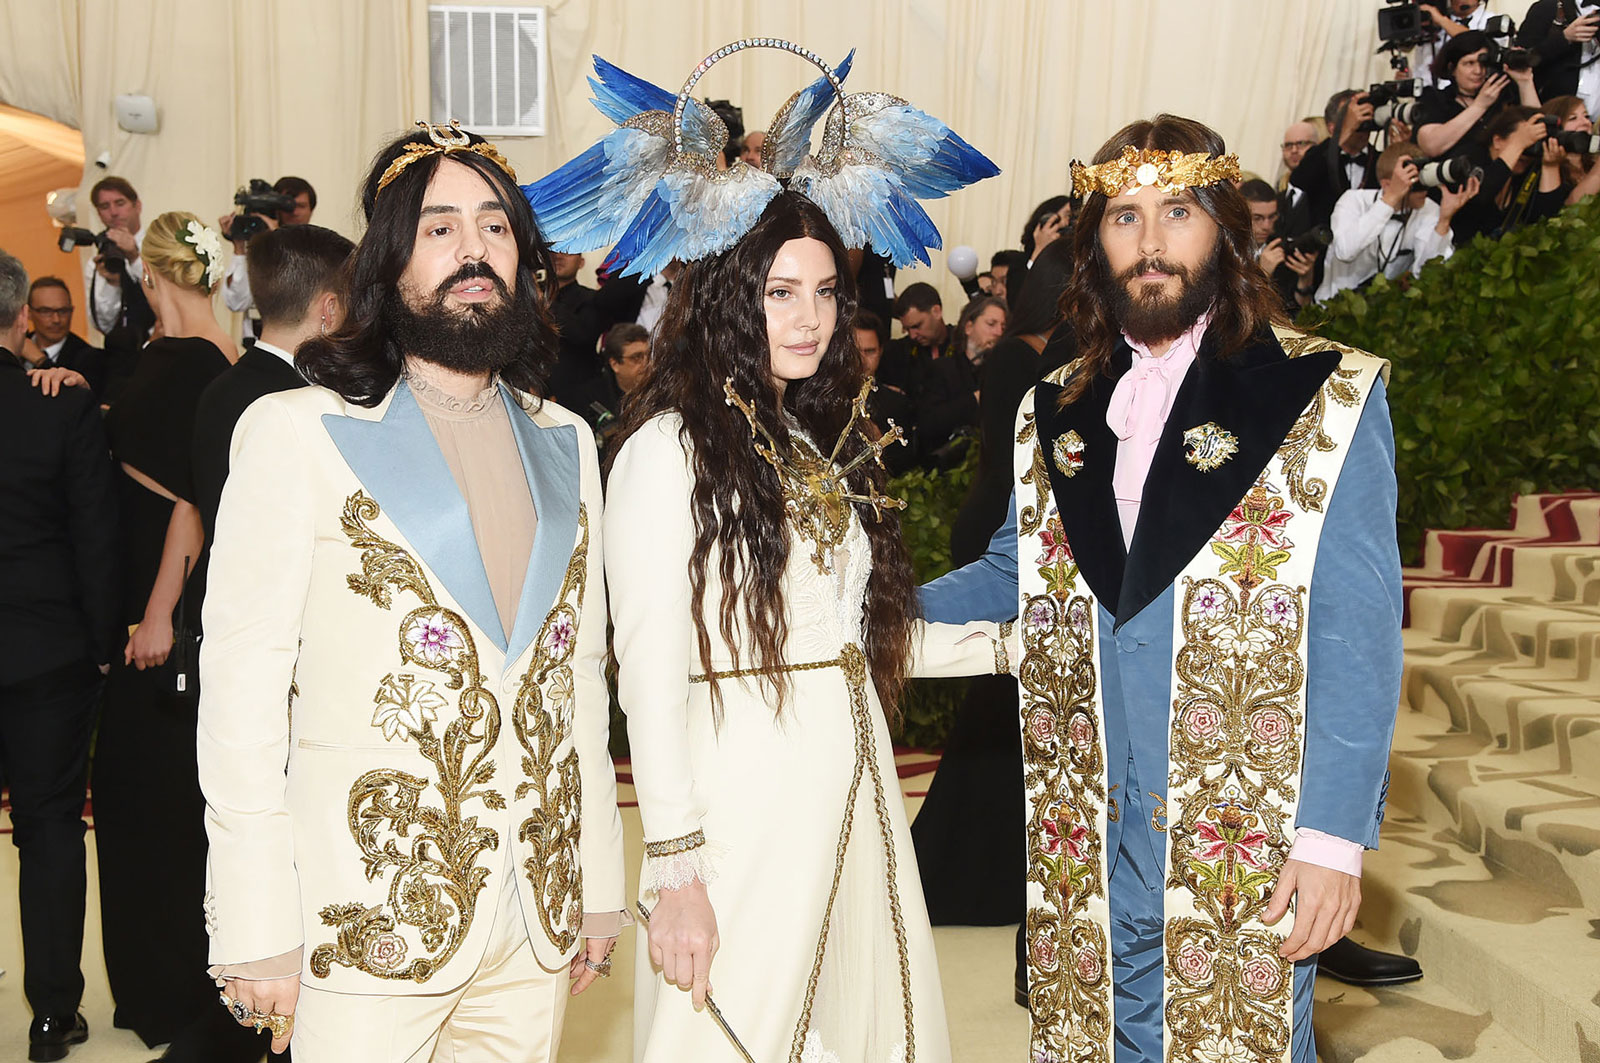 Alessandro Michelle, Lana del Rey and Jared Leto in Gucci Photo: gettyimages.es